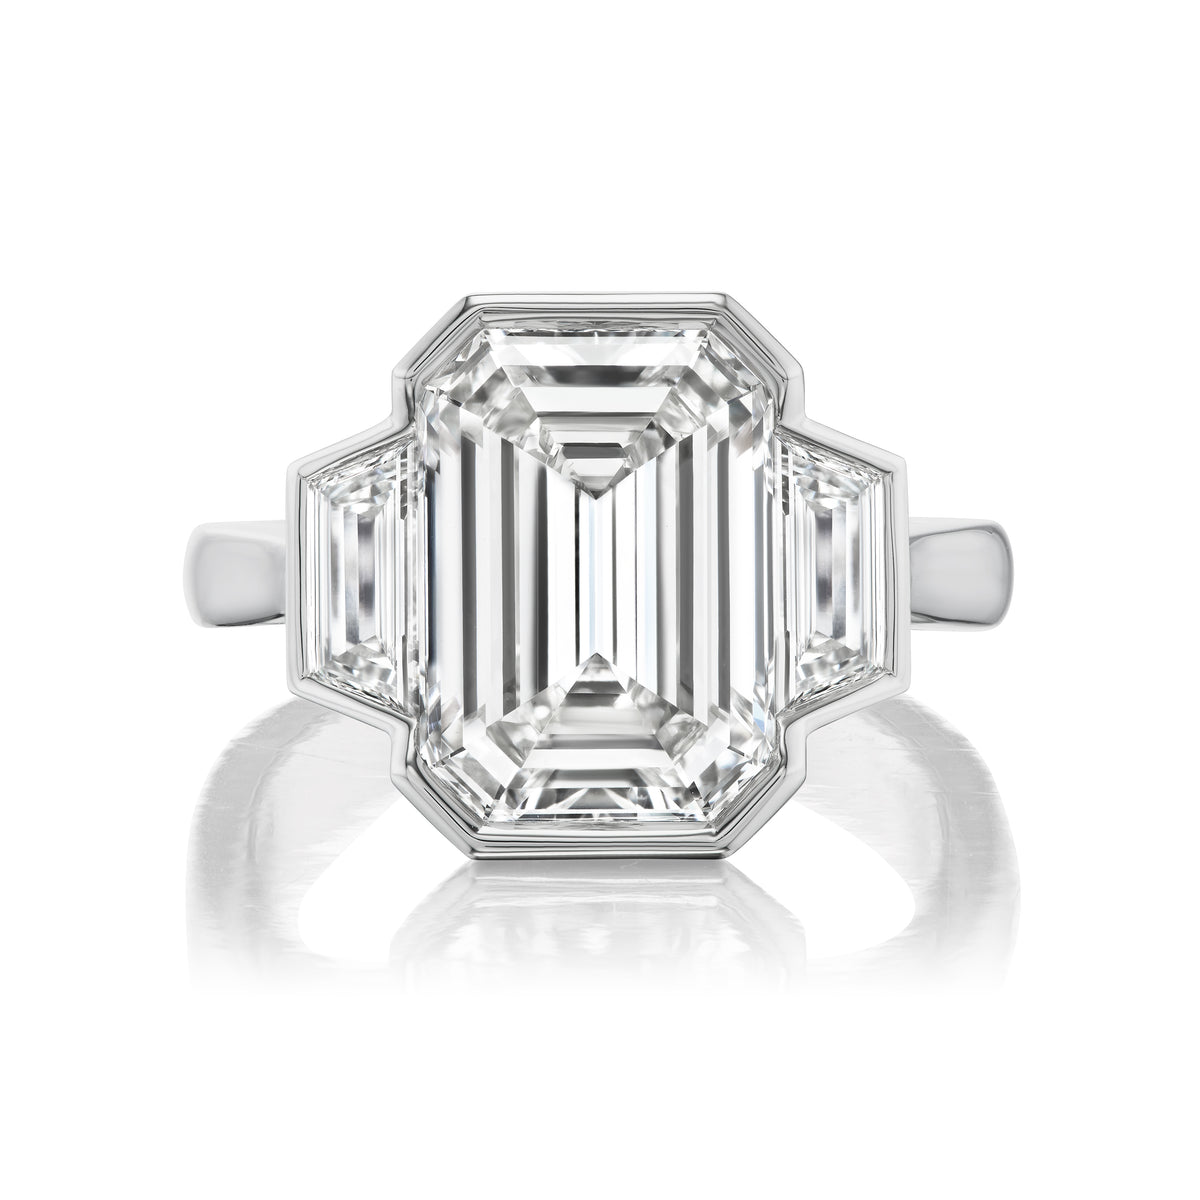 Emerald Cut Diamond Engagement Ring with Bezel Setting and Trapezoid Side Stones